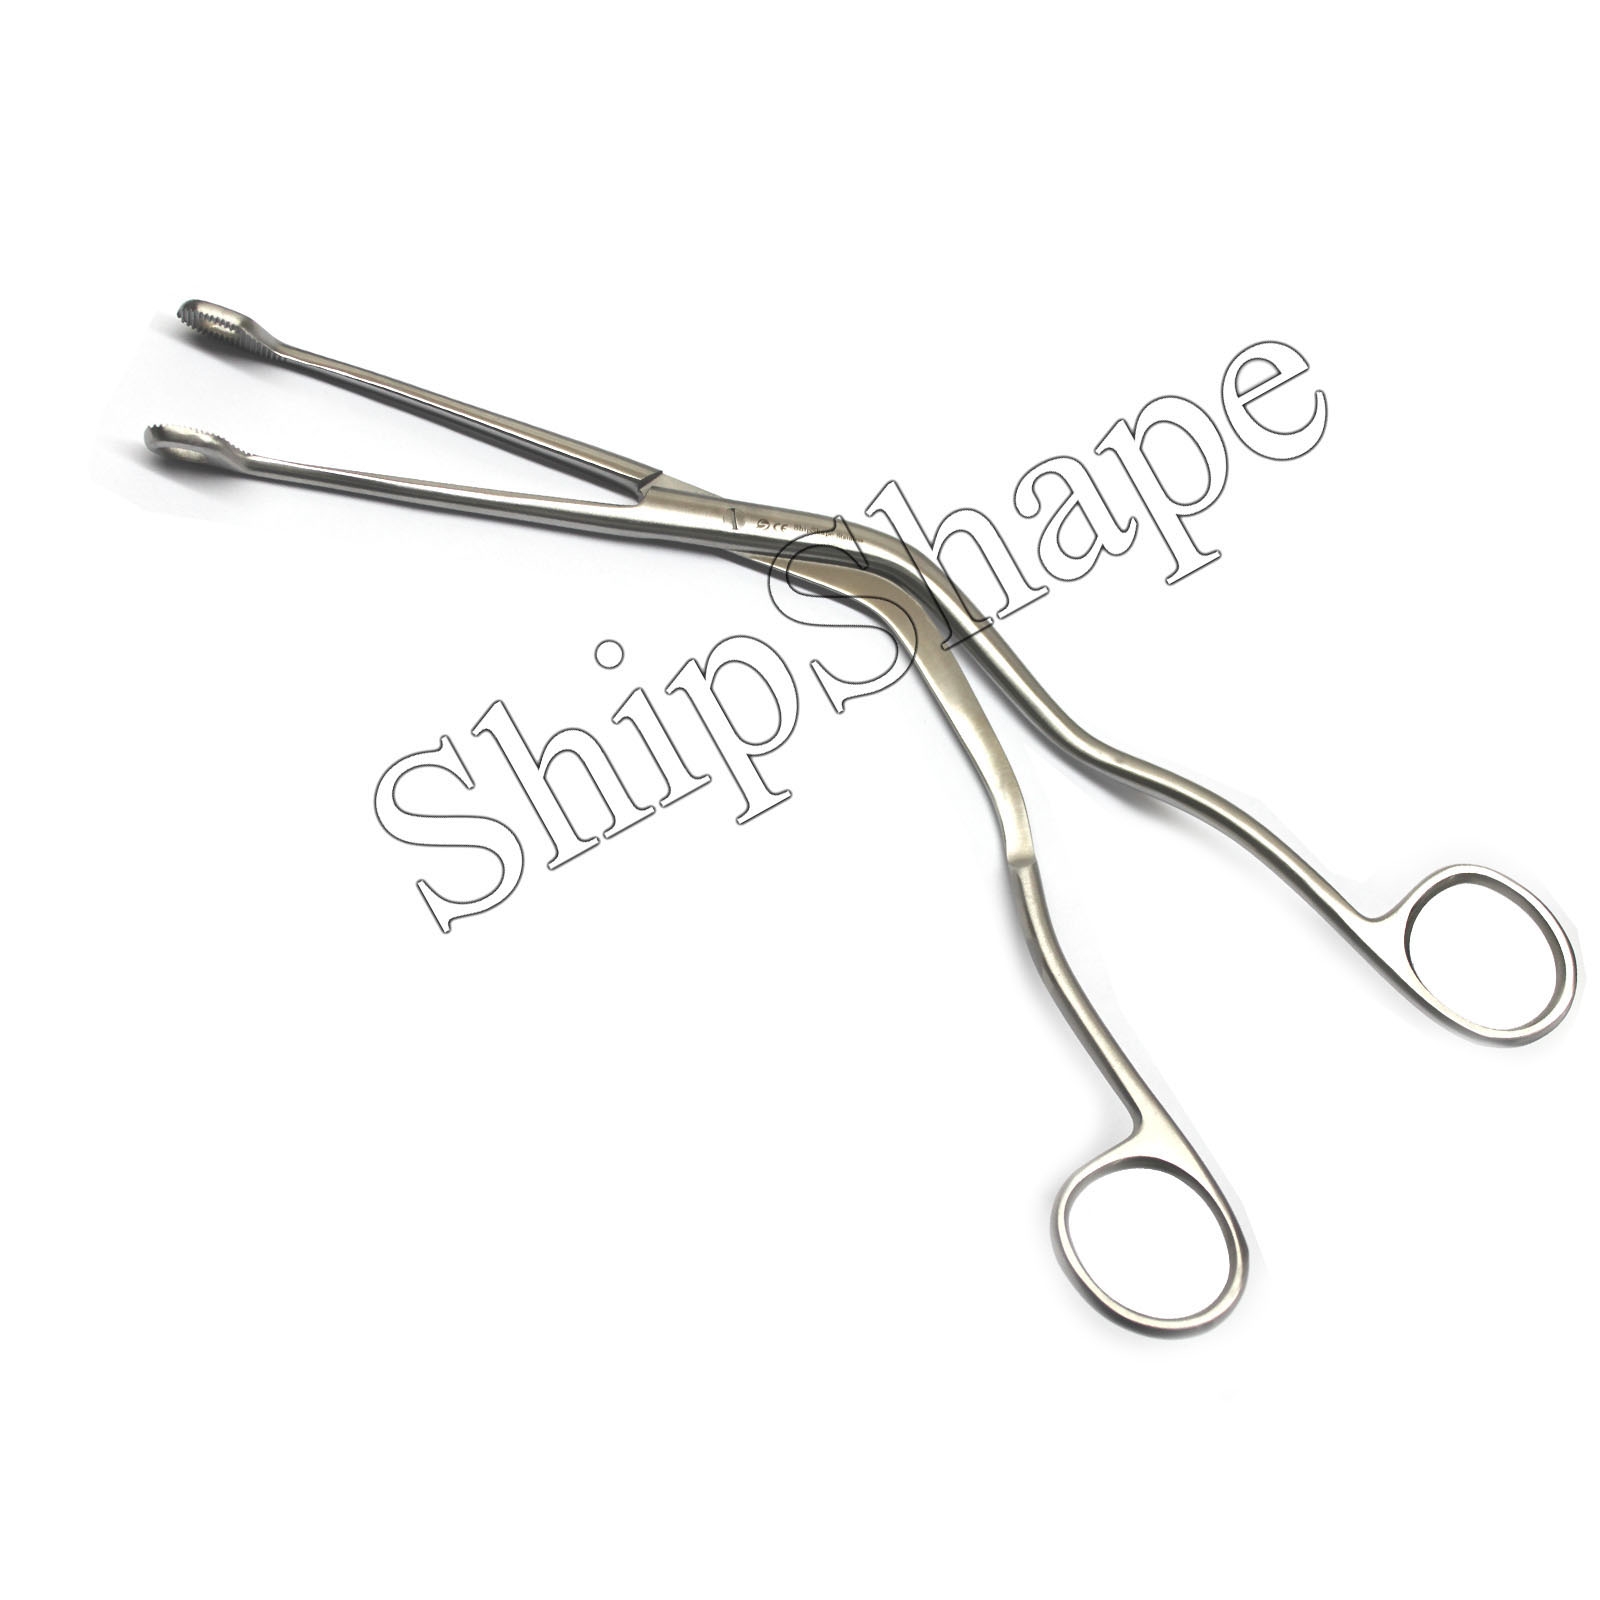 Magill Forcep Curved 10" Intubation Tracheal Tube Forcep Surgical Instruments CE-273